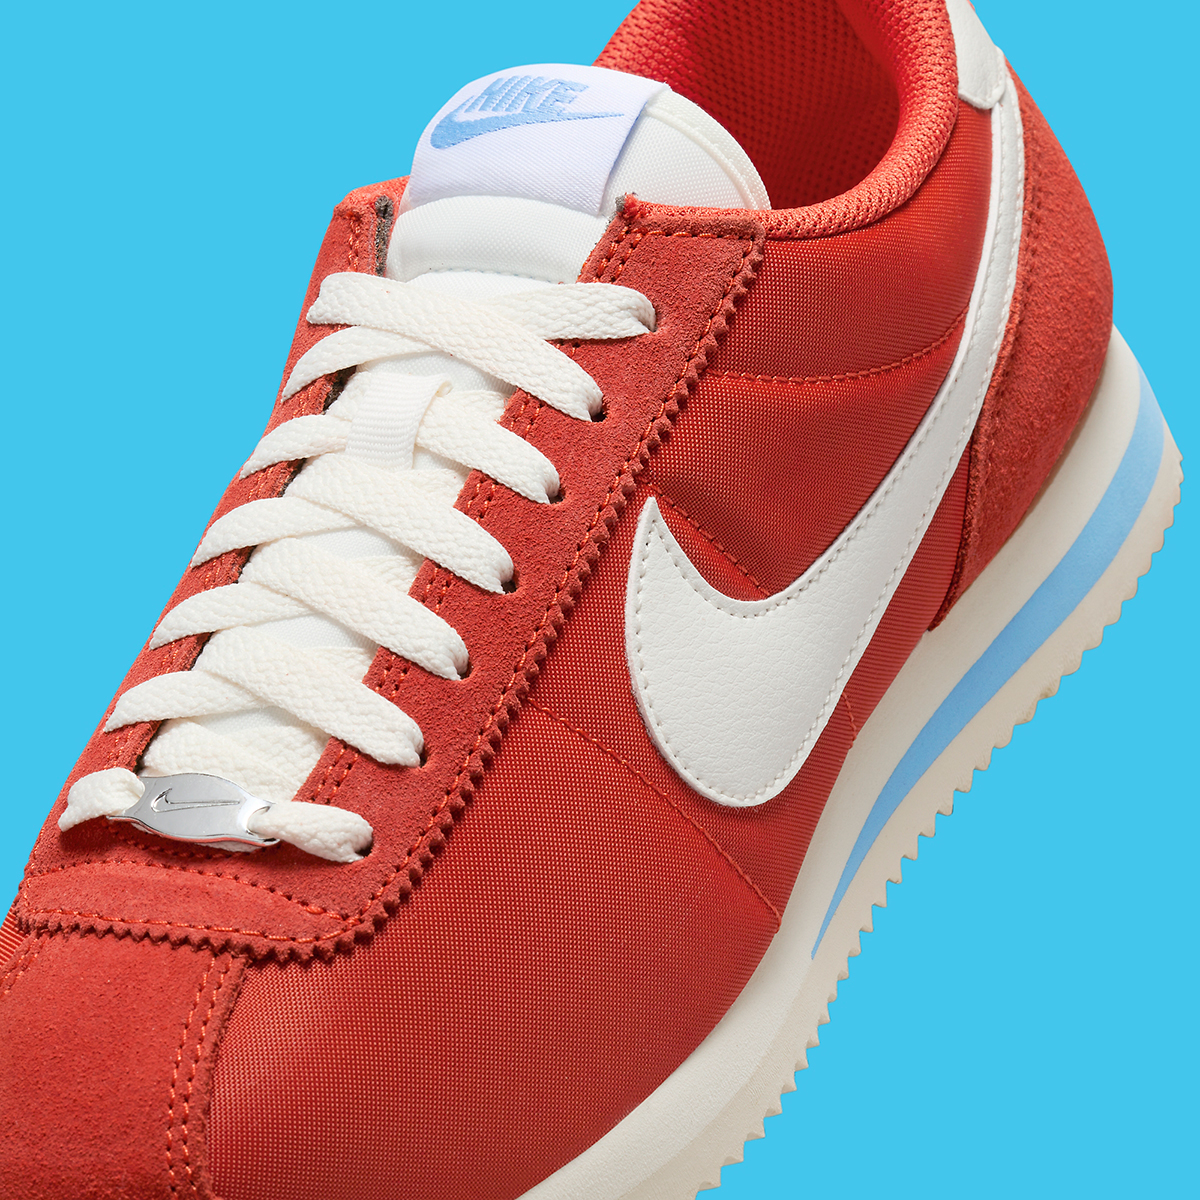 Nike with Cortez Womens Picante Red University Blue Dz2795 601 1